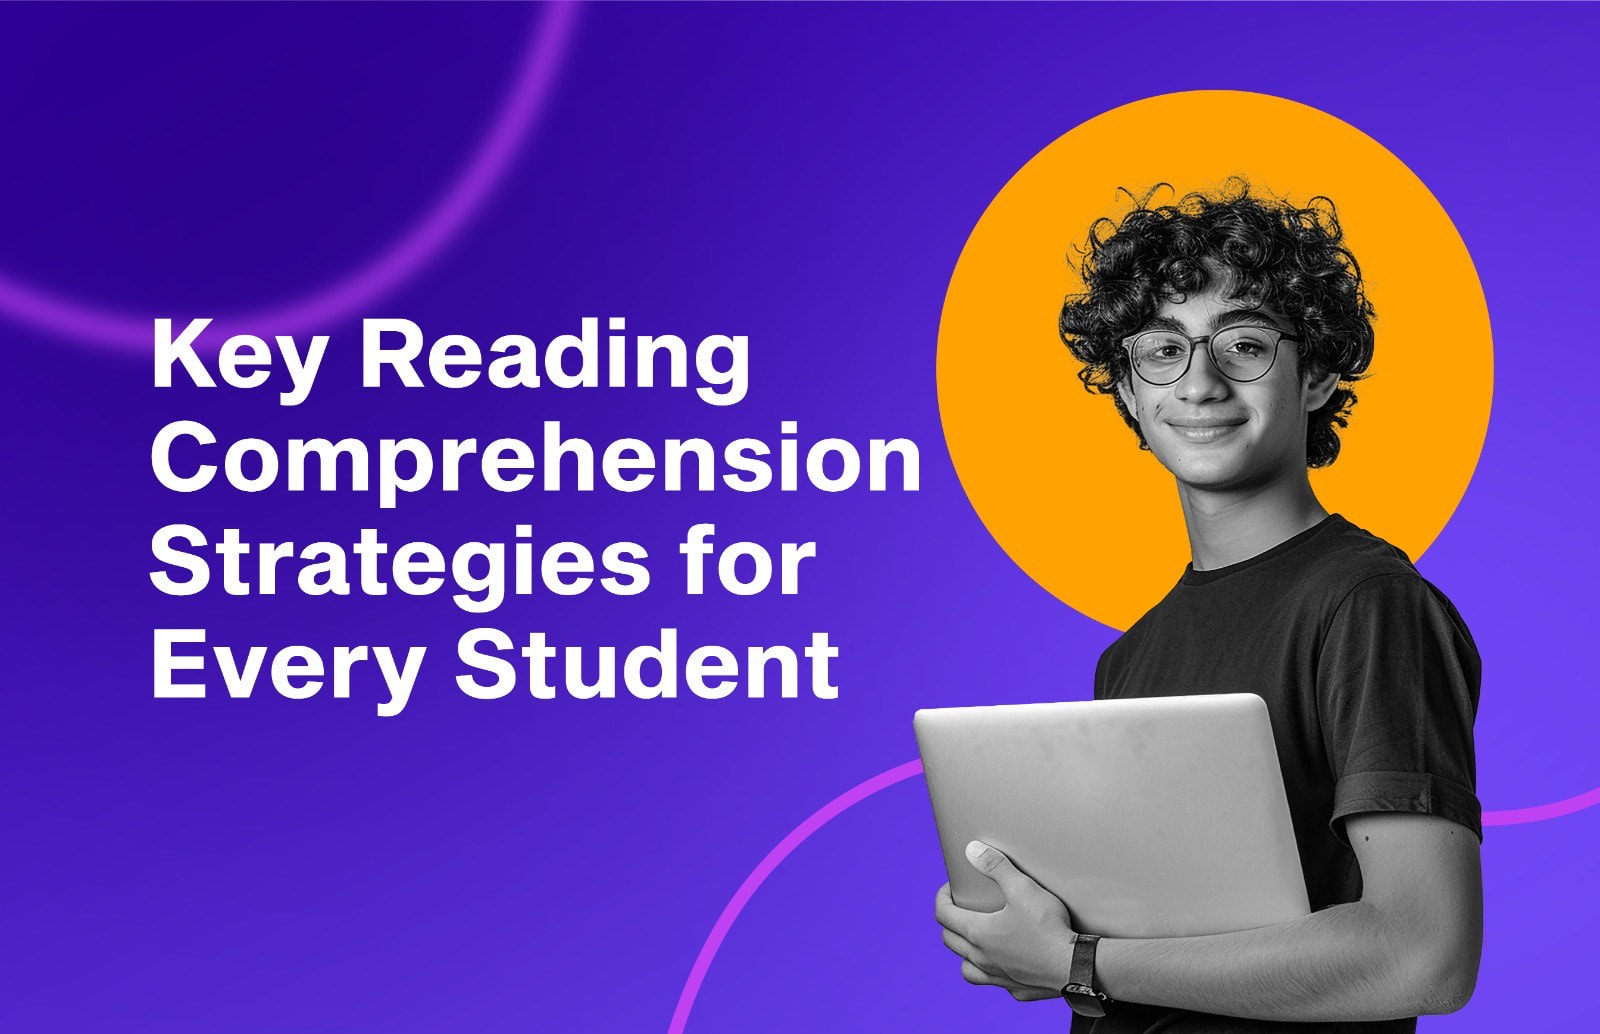 Top Reading Comprehension Strategies Every Student Can Use